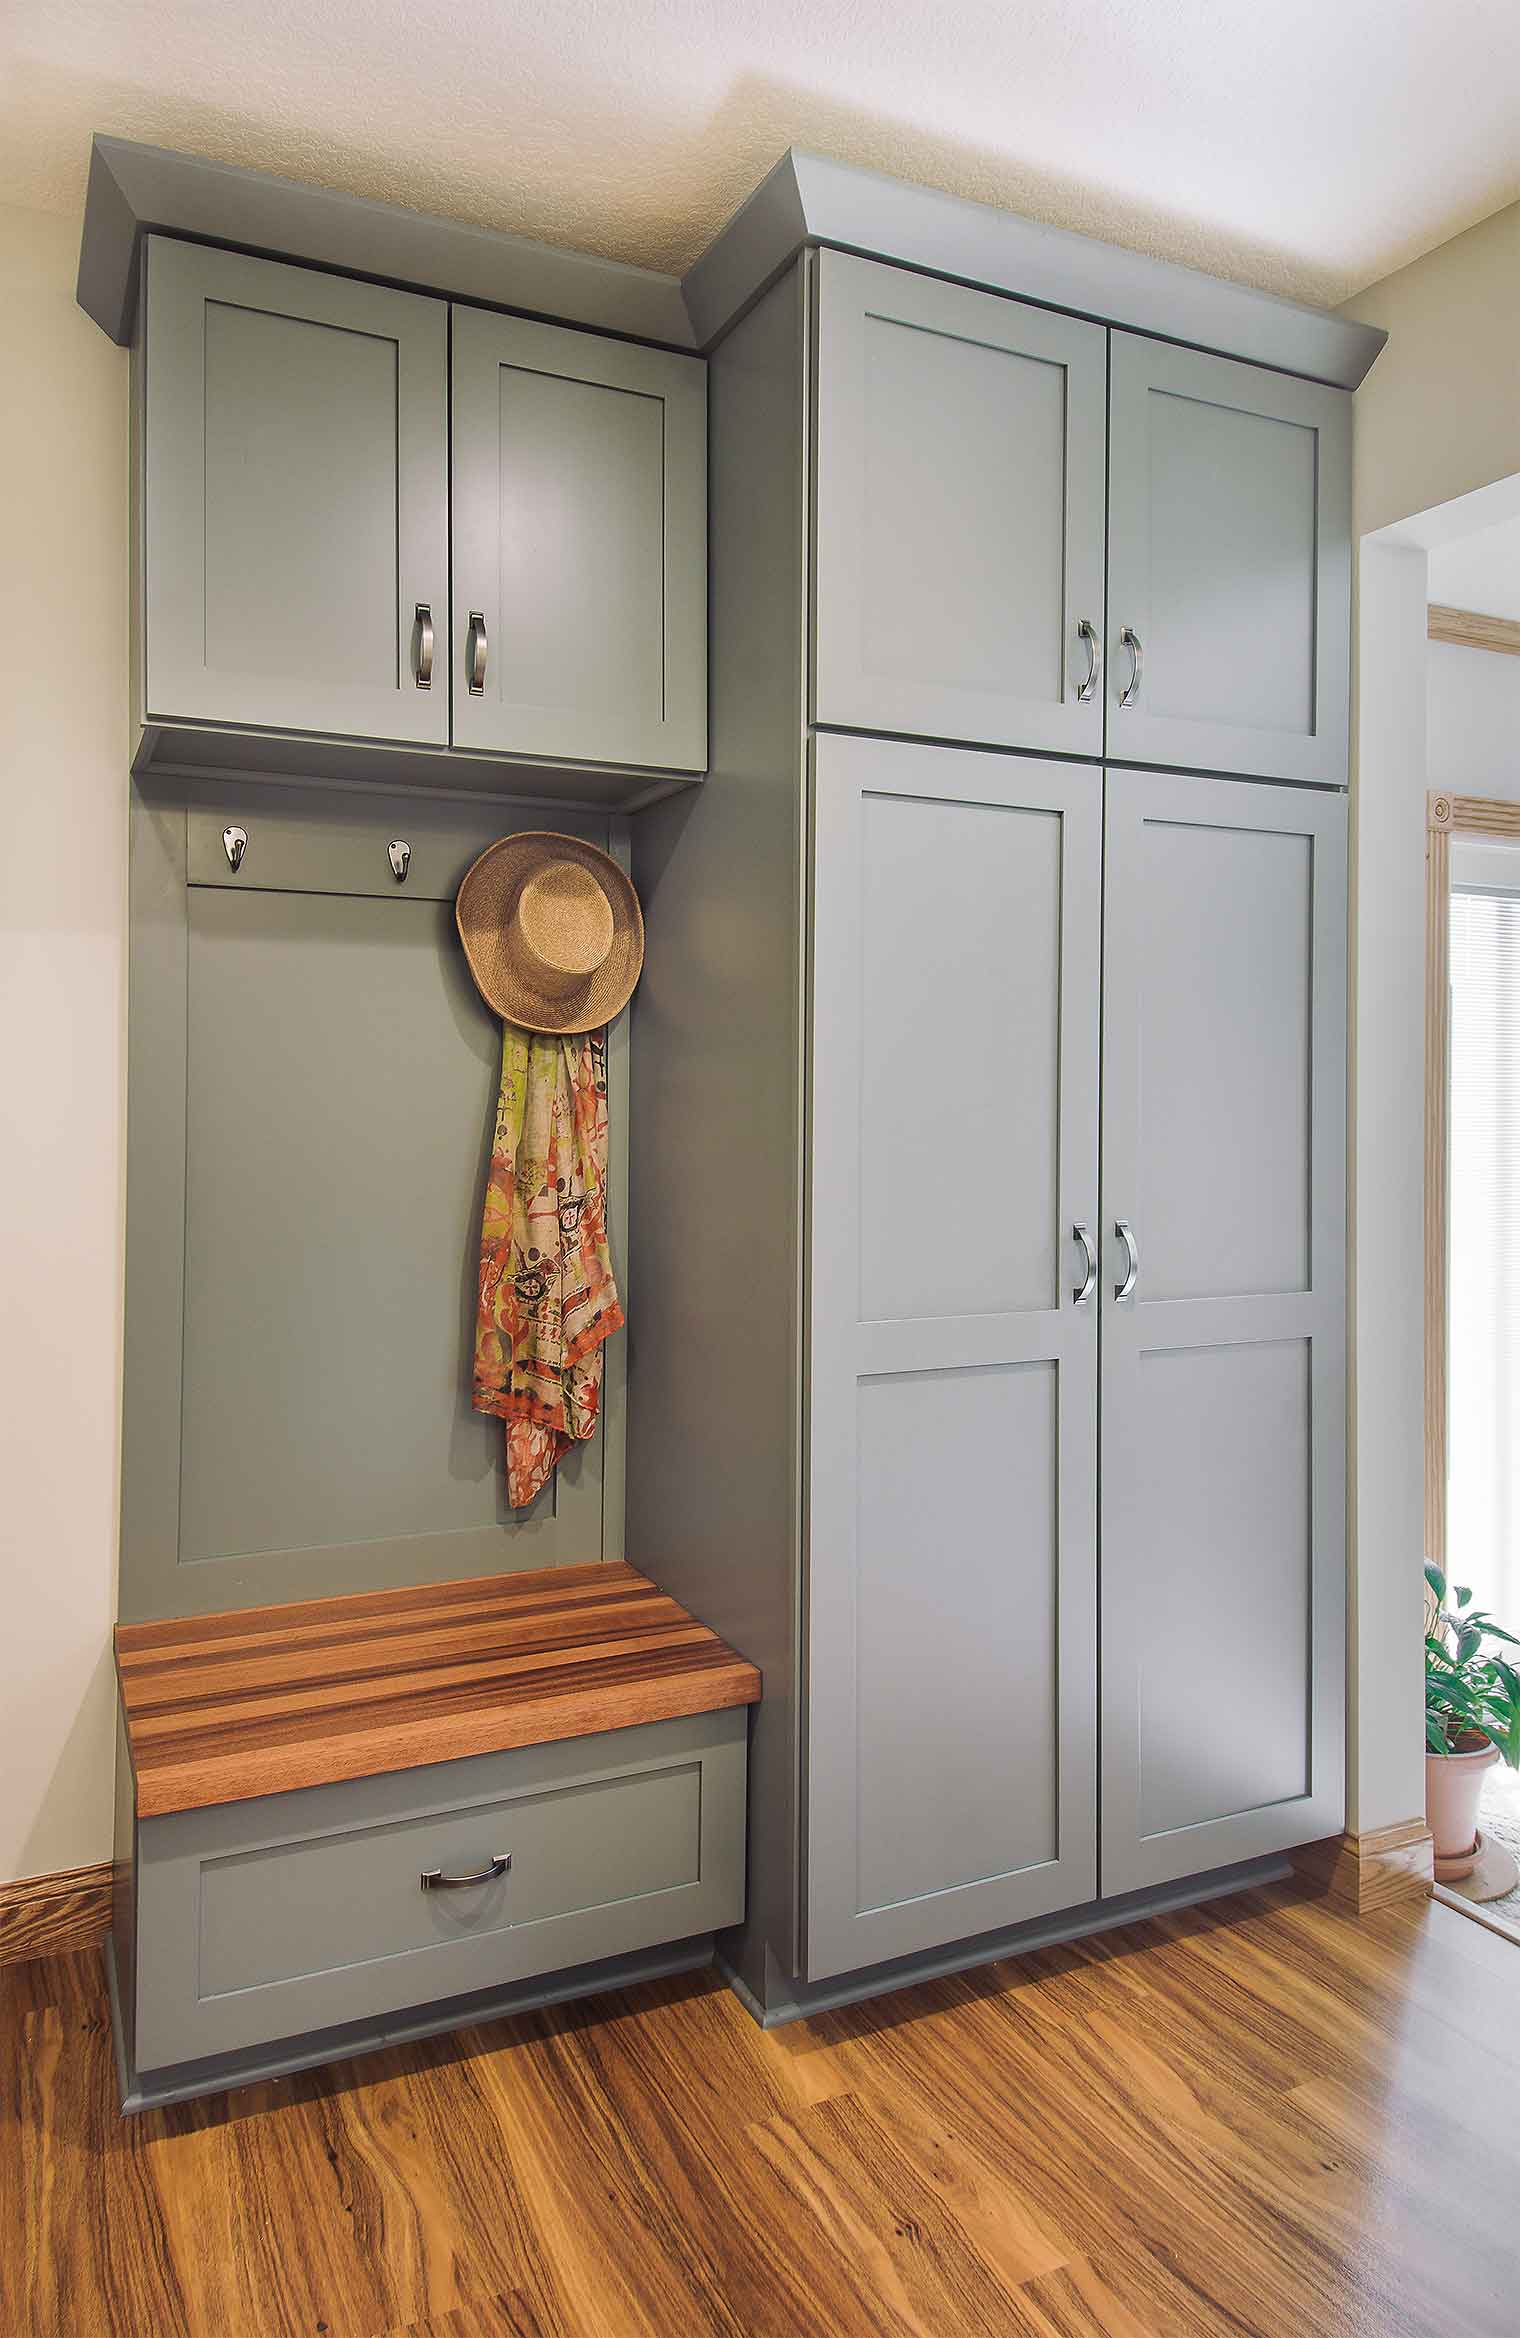 Dropzone in gray cabinets by Des Moines kitchen remodeler Silent Rivers